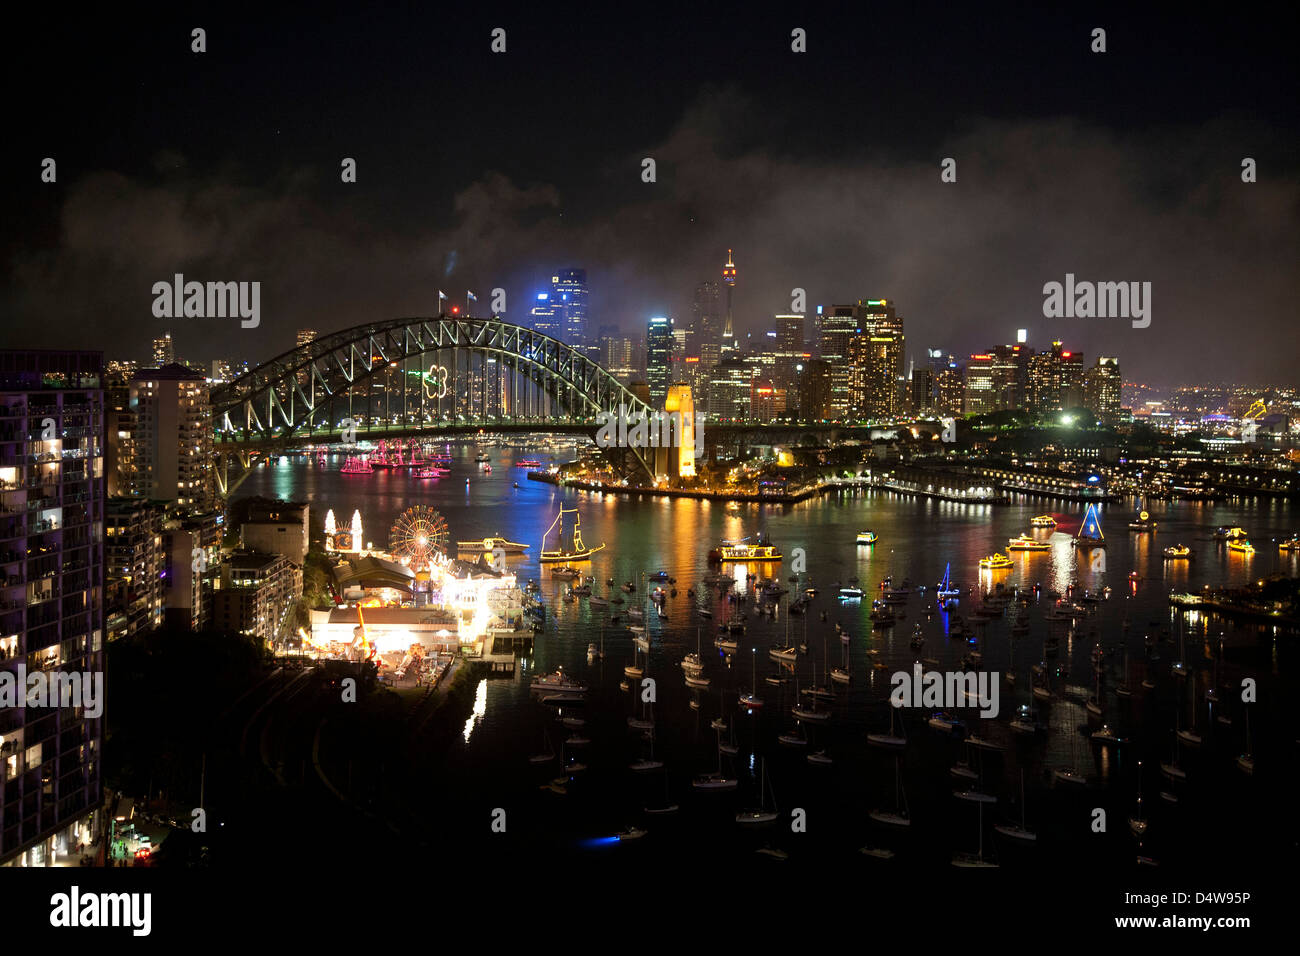 New Year's Eve fireworks celebrations as seen from the North Shore of Sydney's harbour bridge Stock Photo